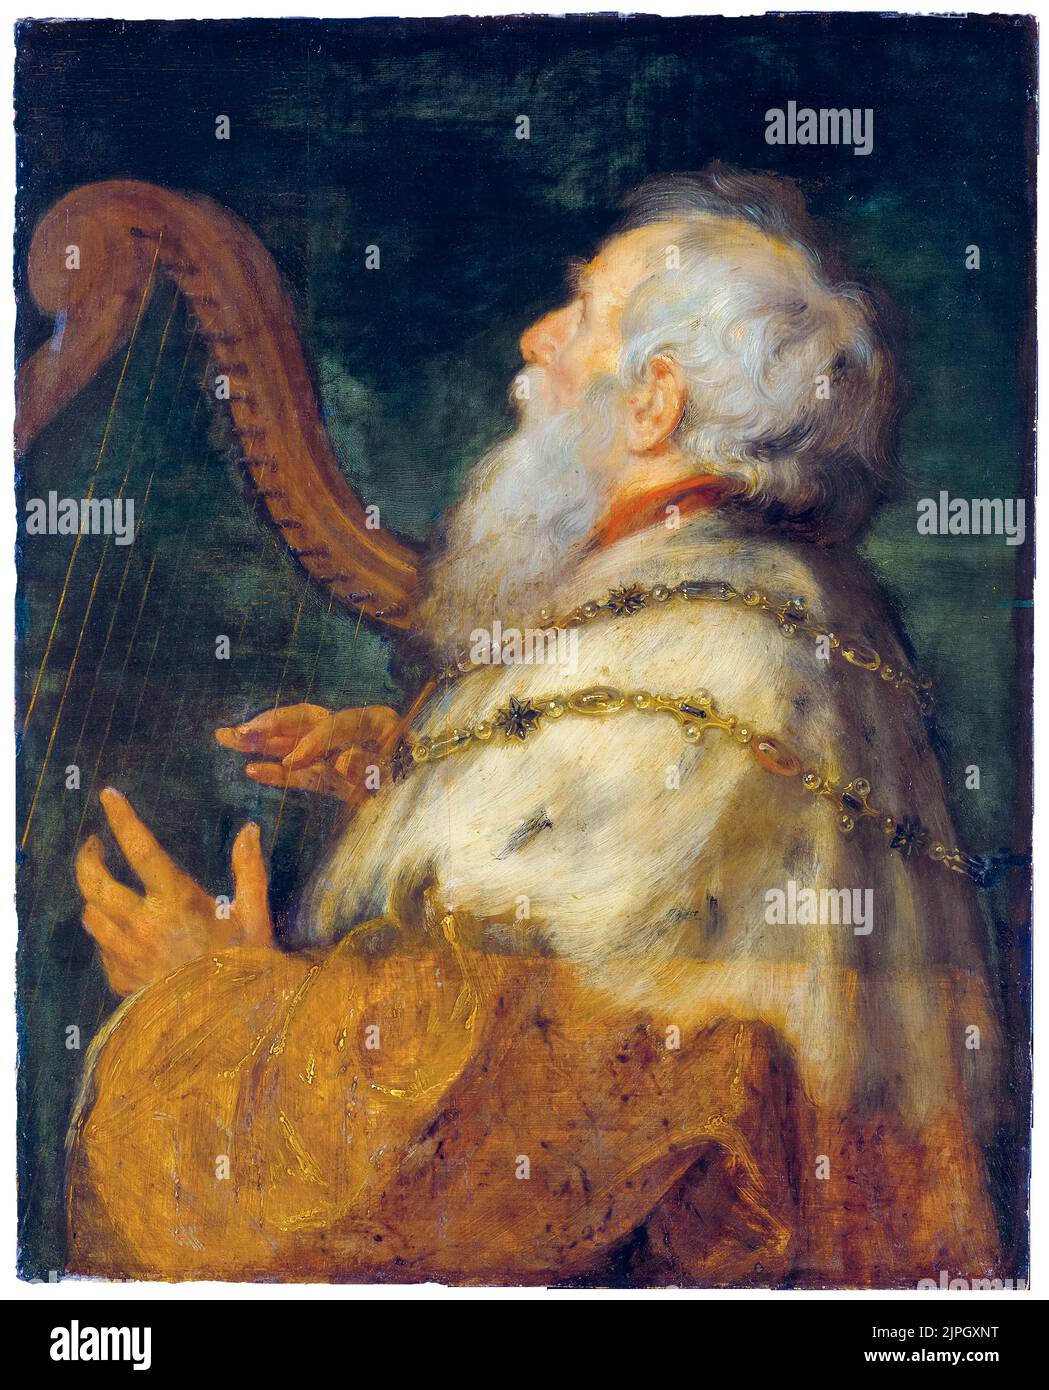 Peter Paul Rubens, King David Playing the Harp, painting in oil on panel, circa 1616 Stock Photo